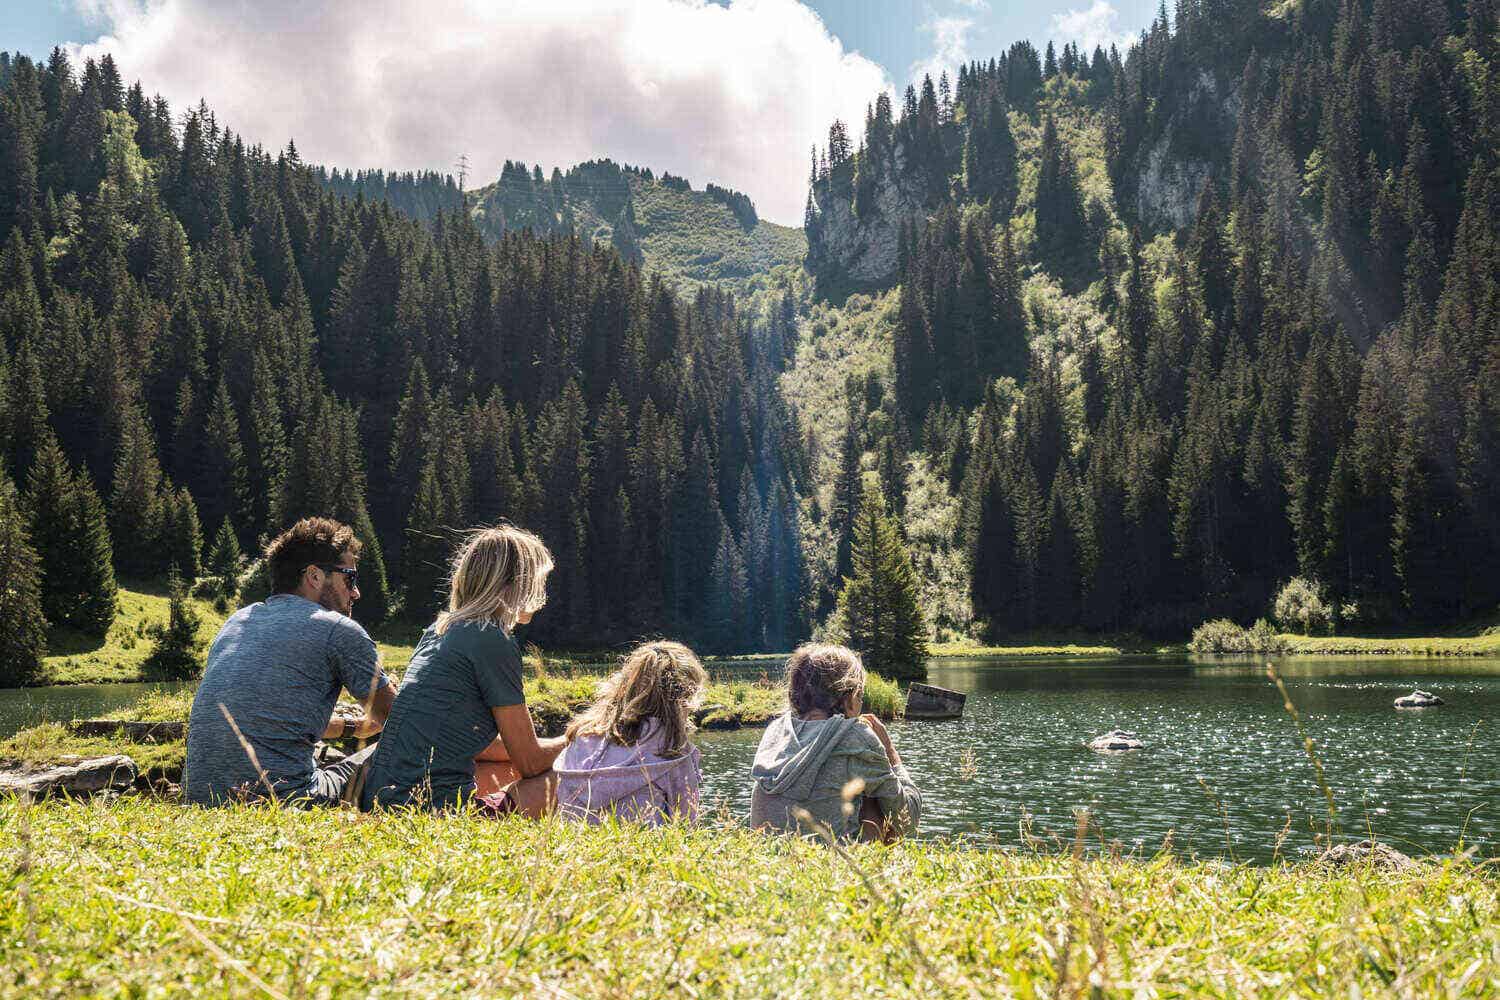 A family sitting on the grass at the side of a mountain lake